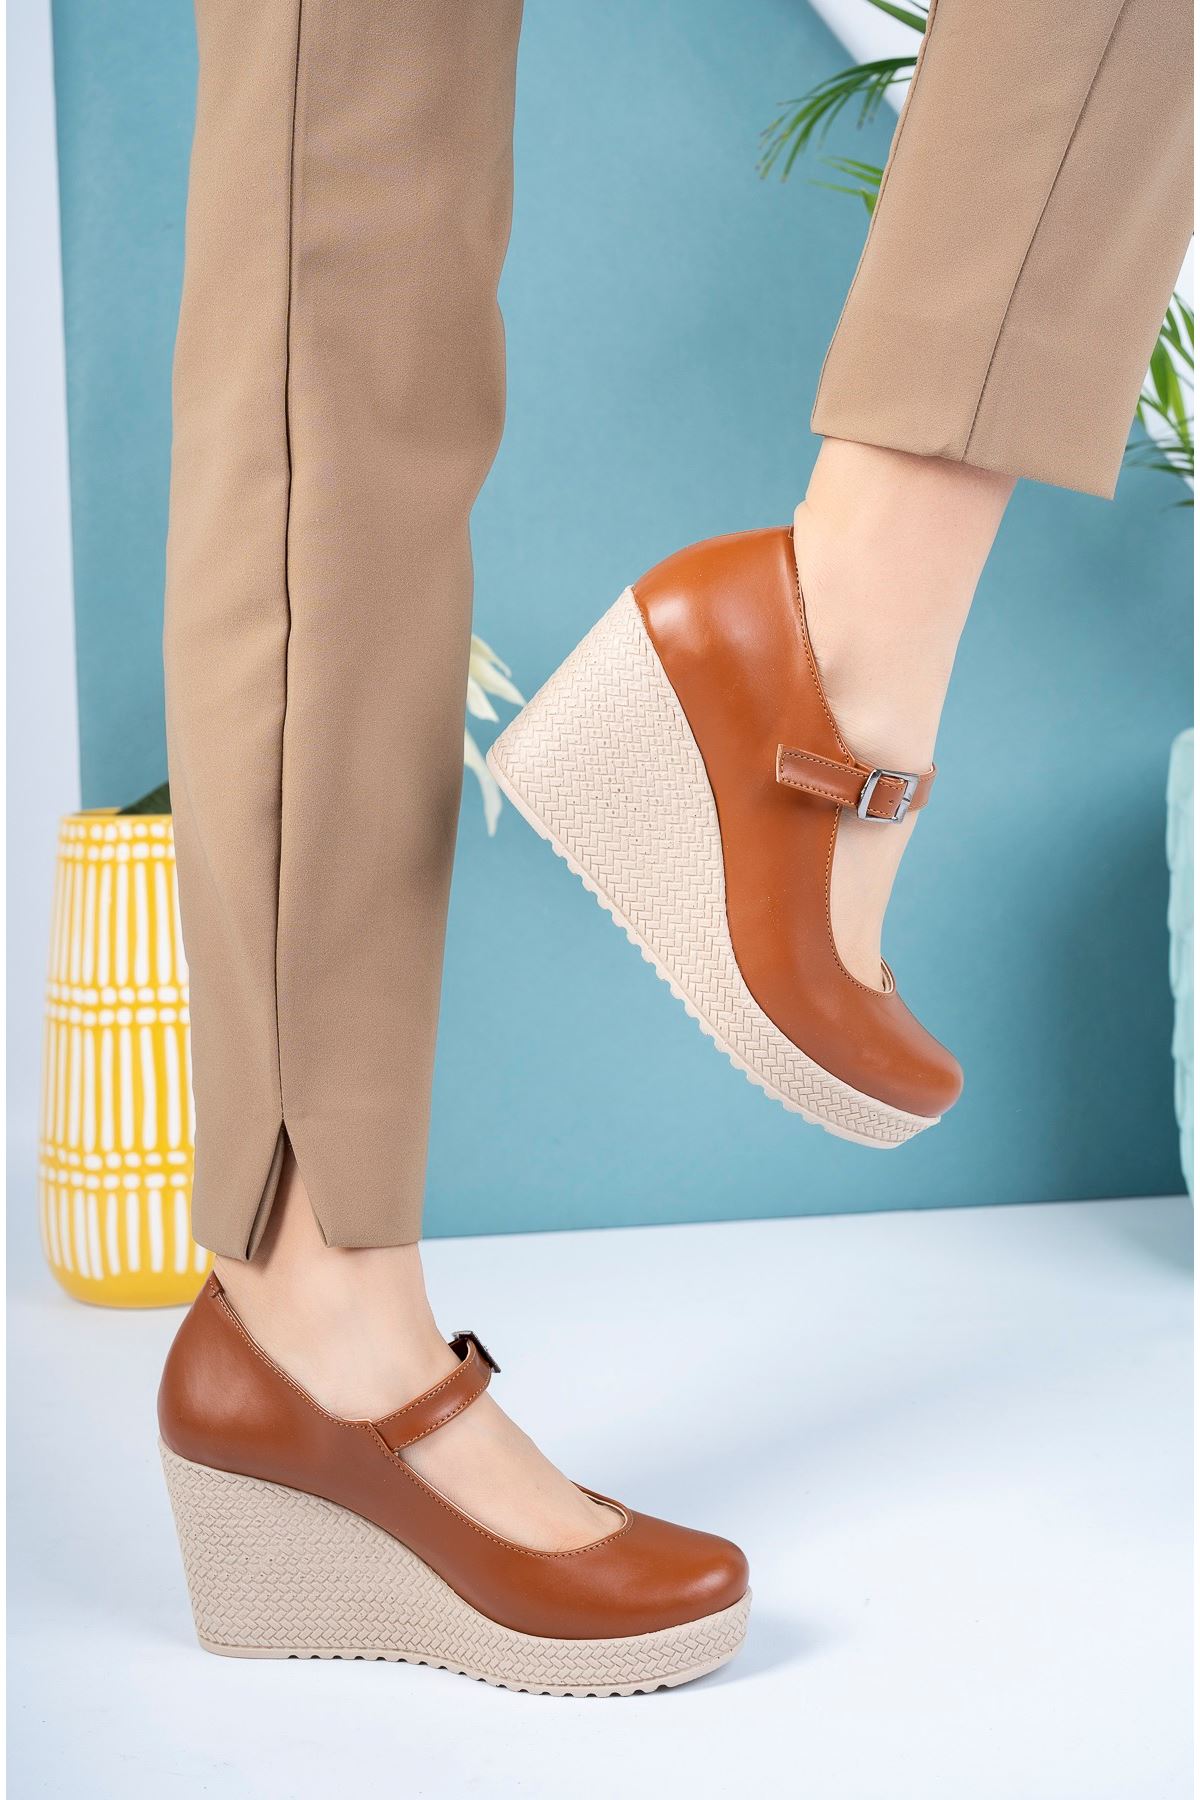 Padded Sole Ankle Buckle Tan Skin Shoes